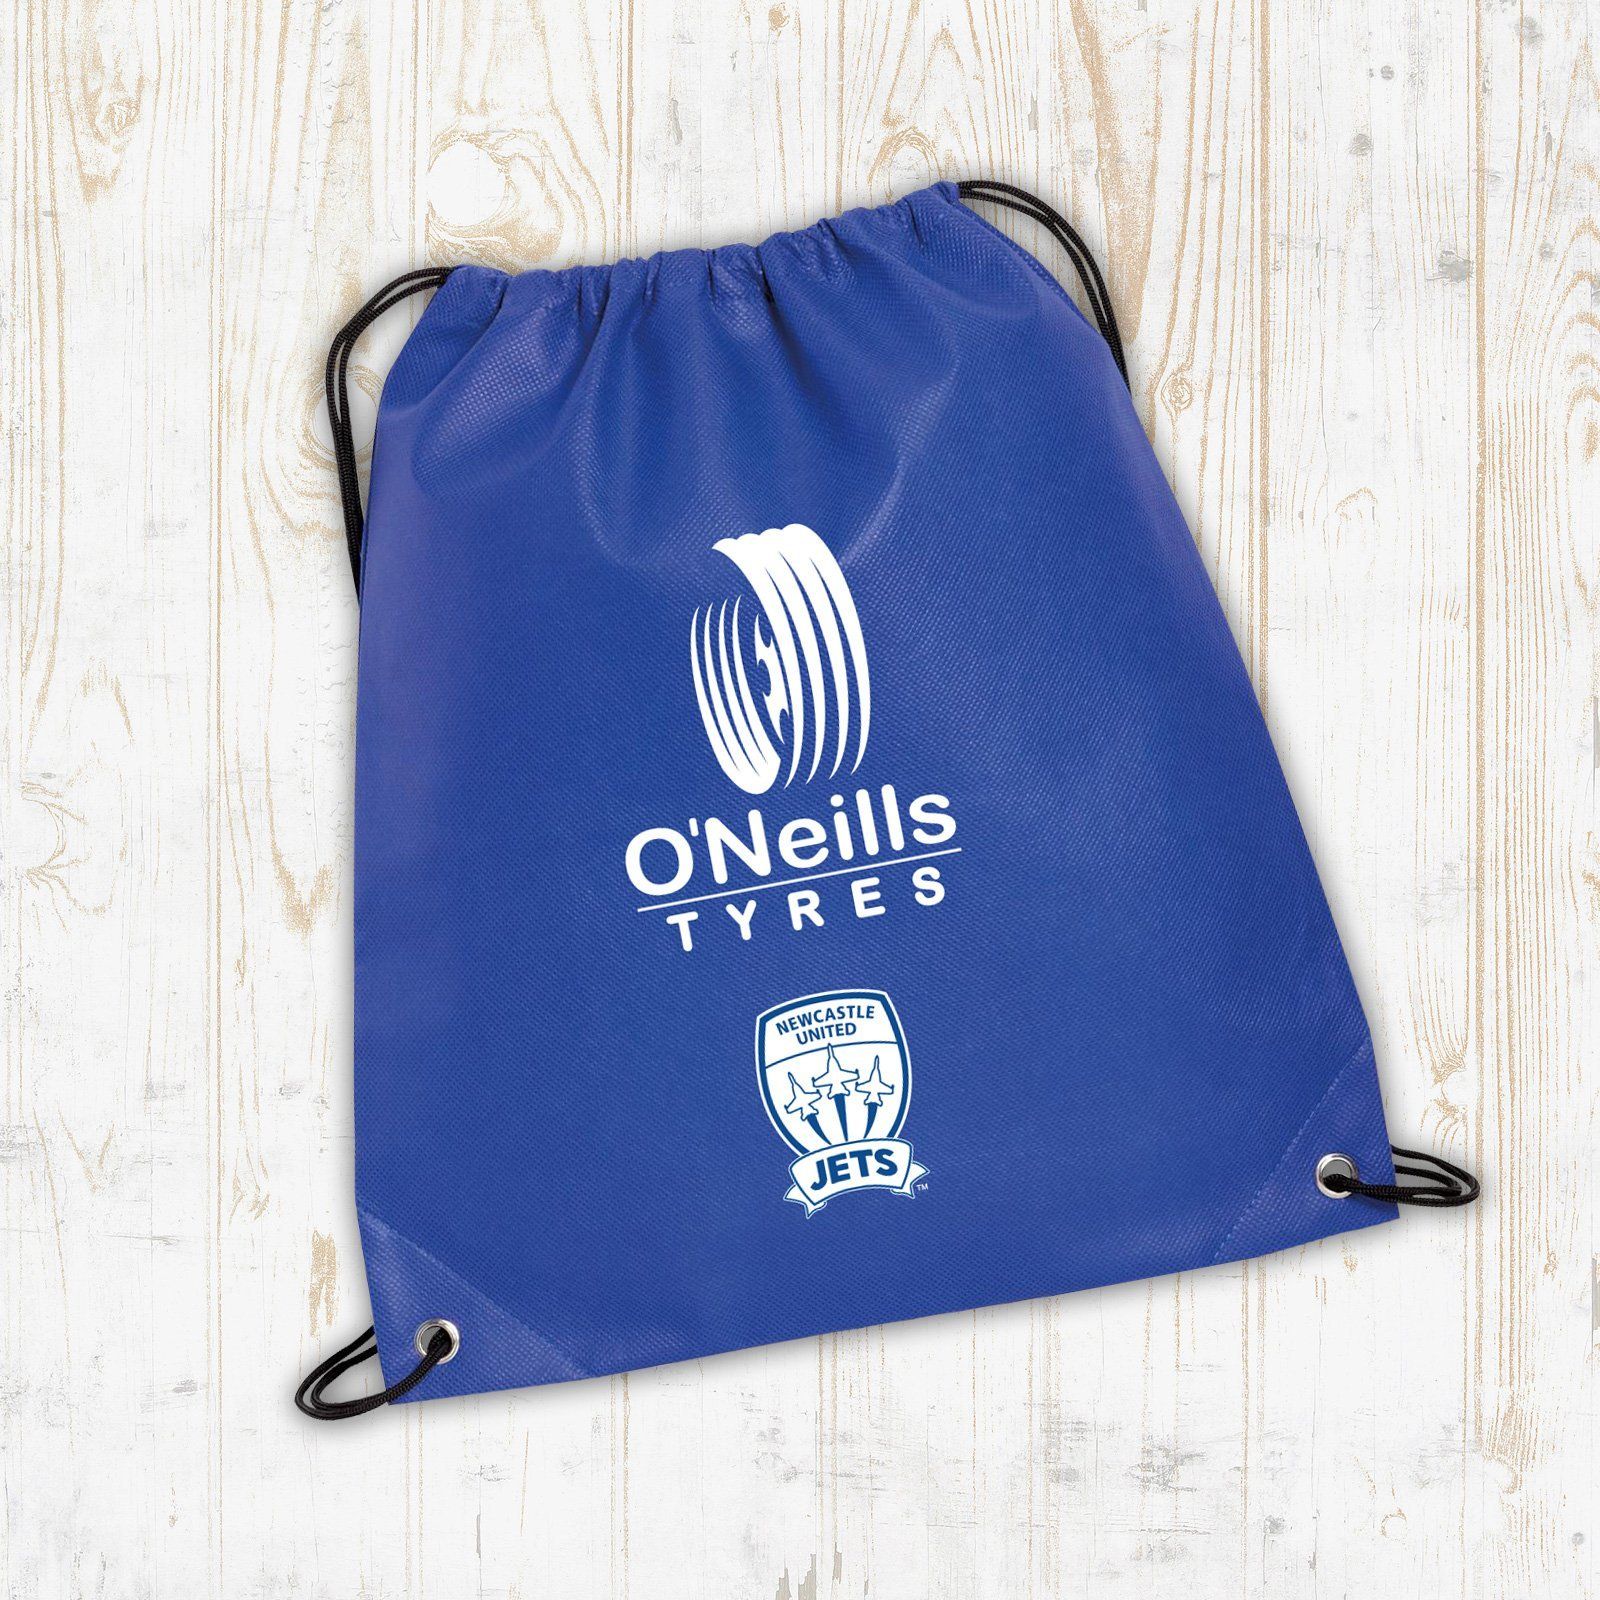 O'Neill's Tyres Event Backpack